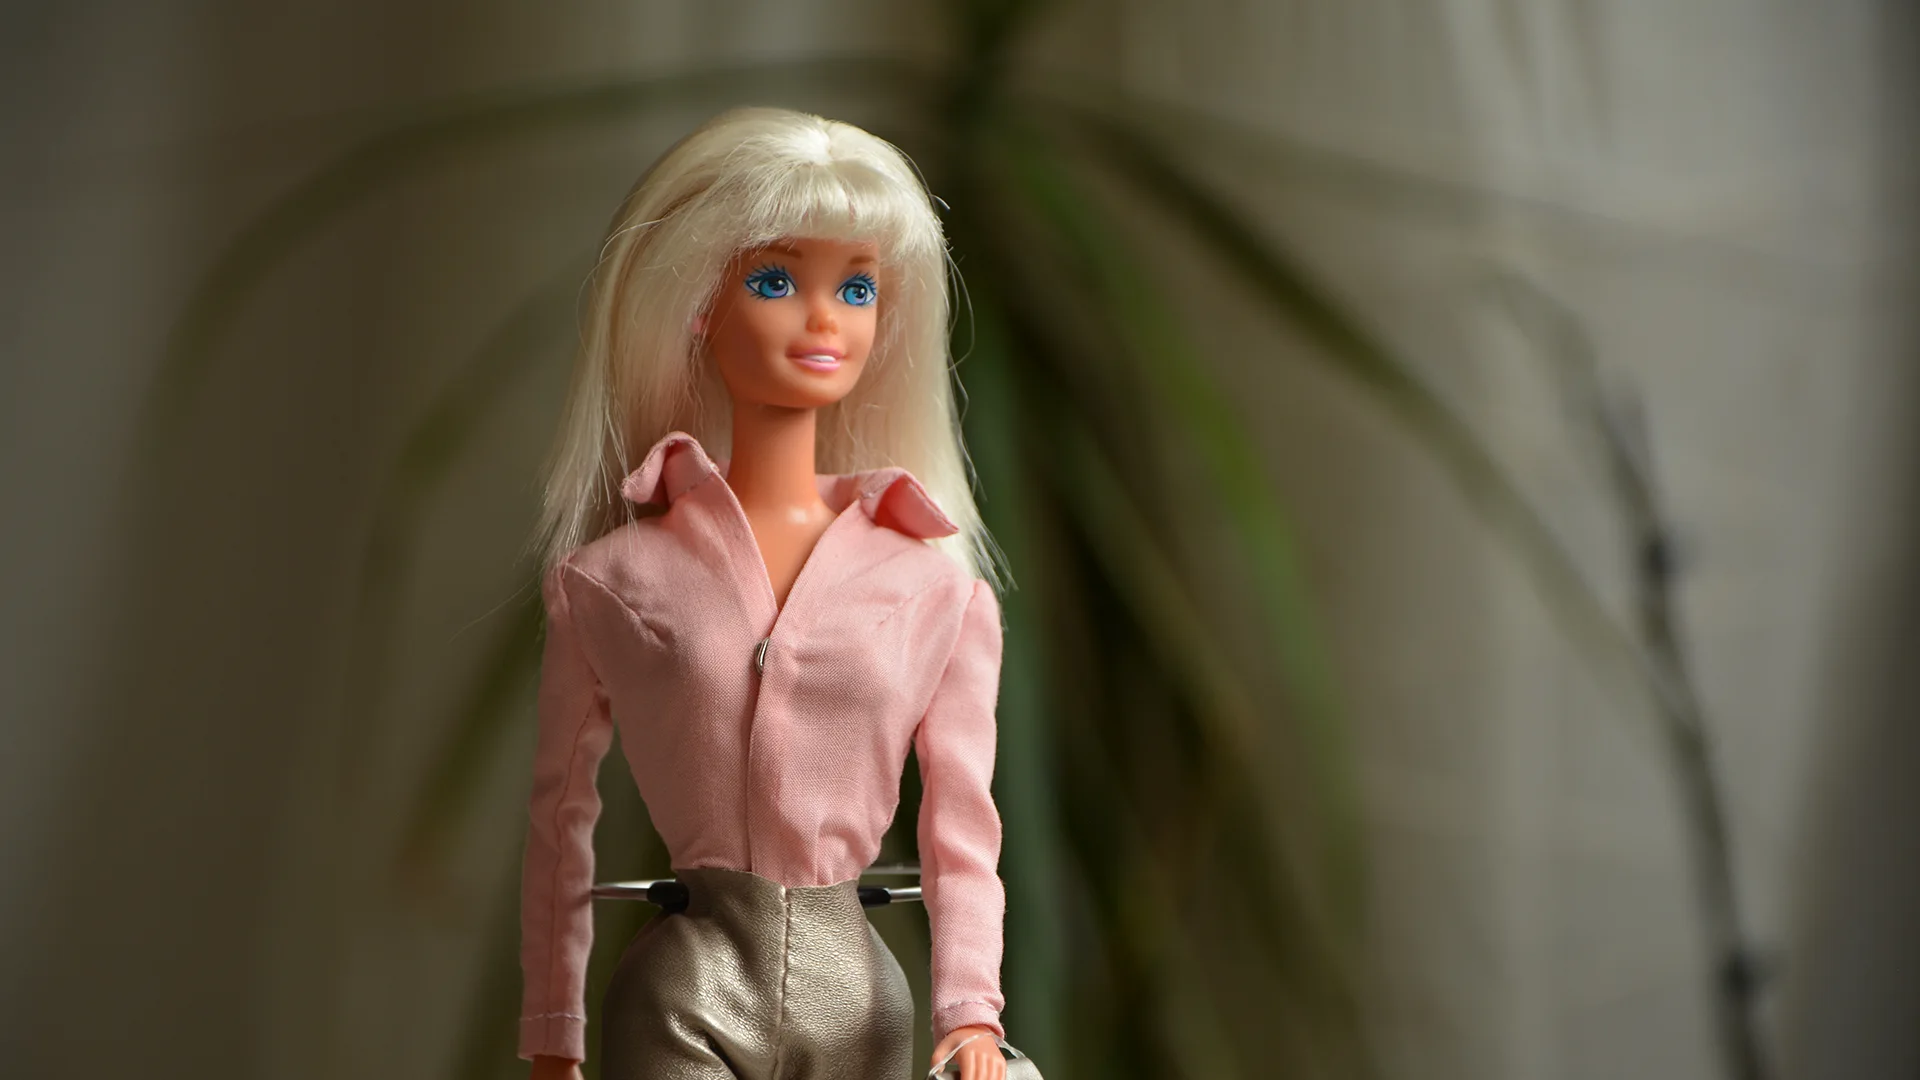 A barbie doll with a pink shirt.